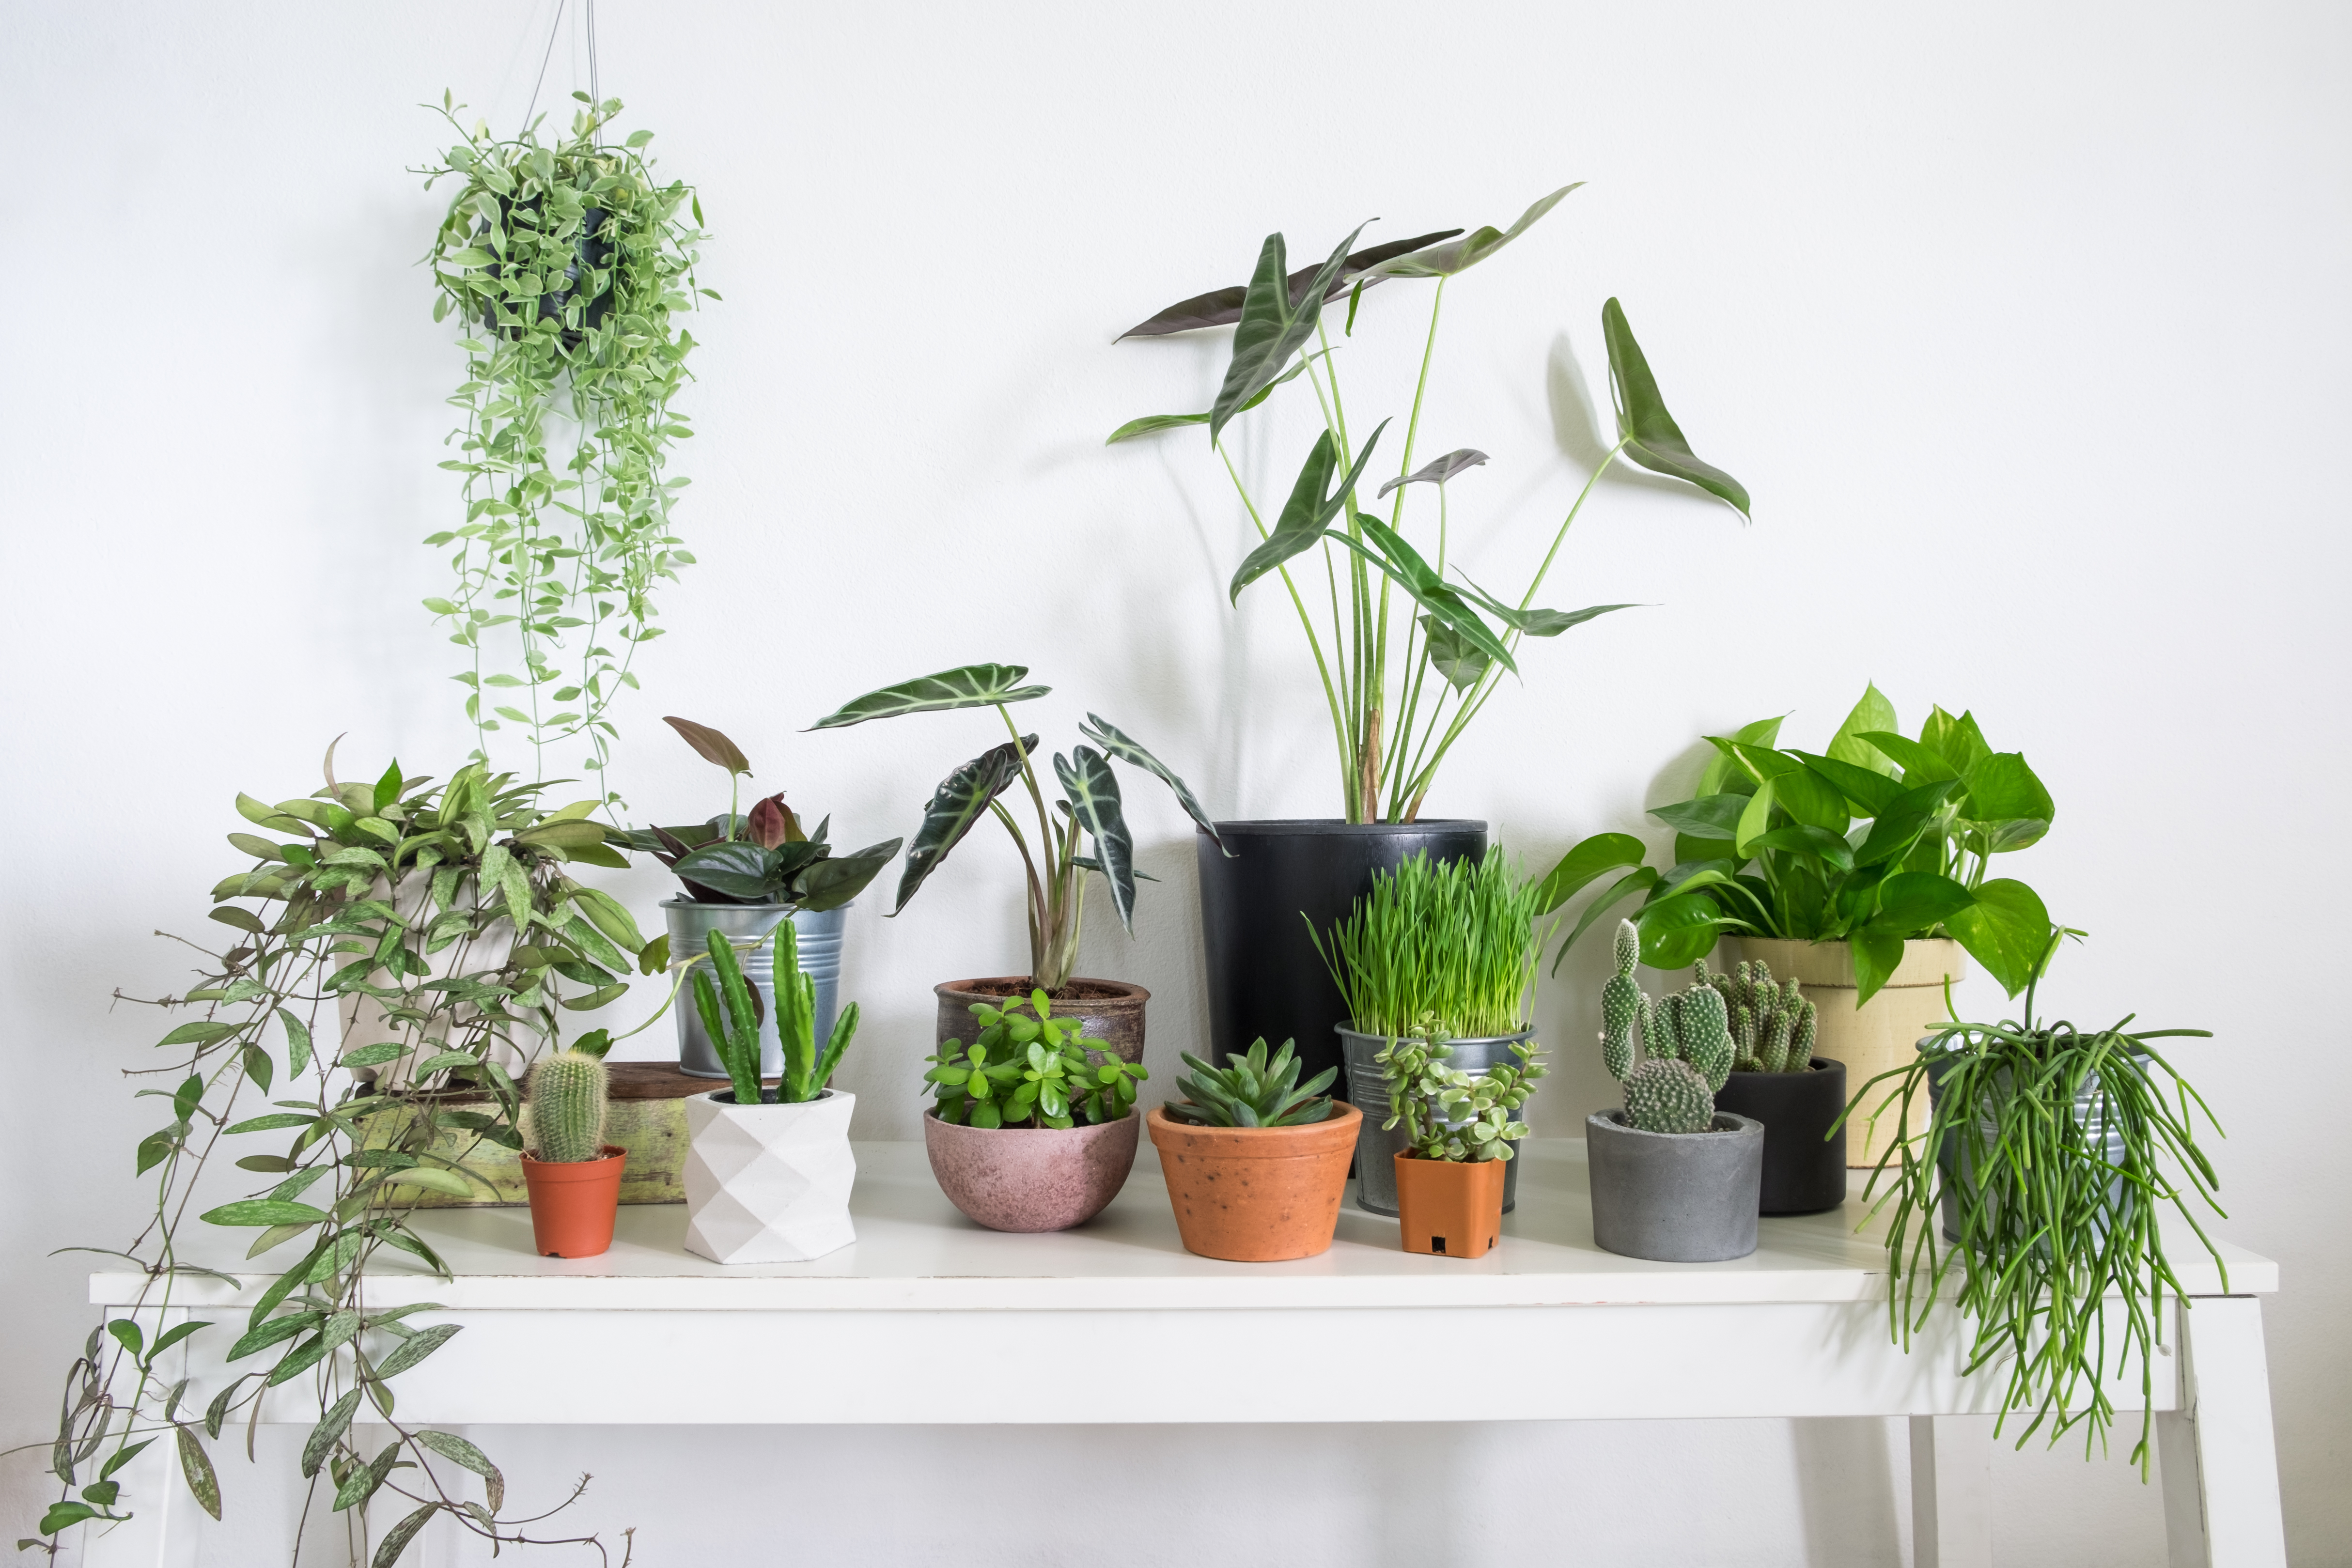 Several plants of varying heights—some trailing, some upright—sit on a white table in a white room. A strand of pearls plants hangs above on the left.